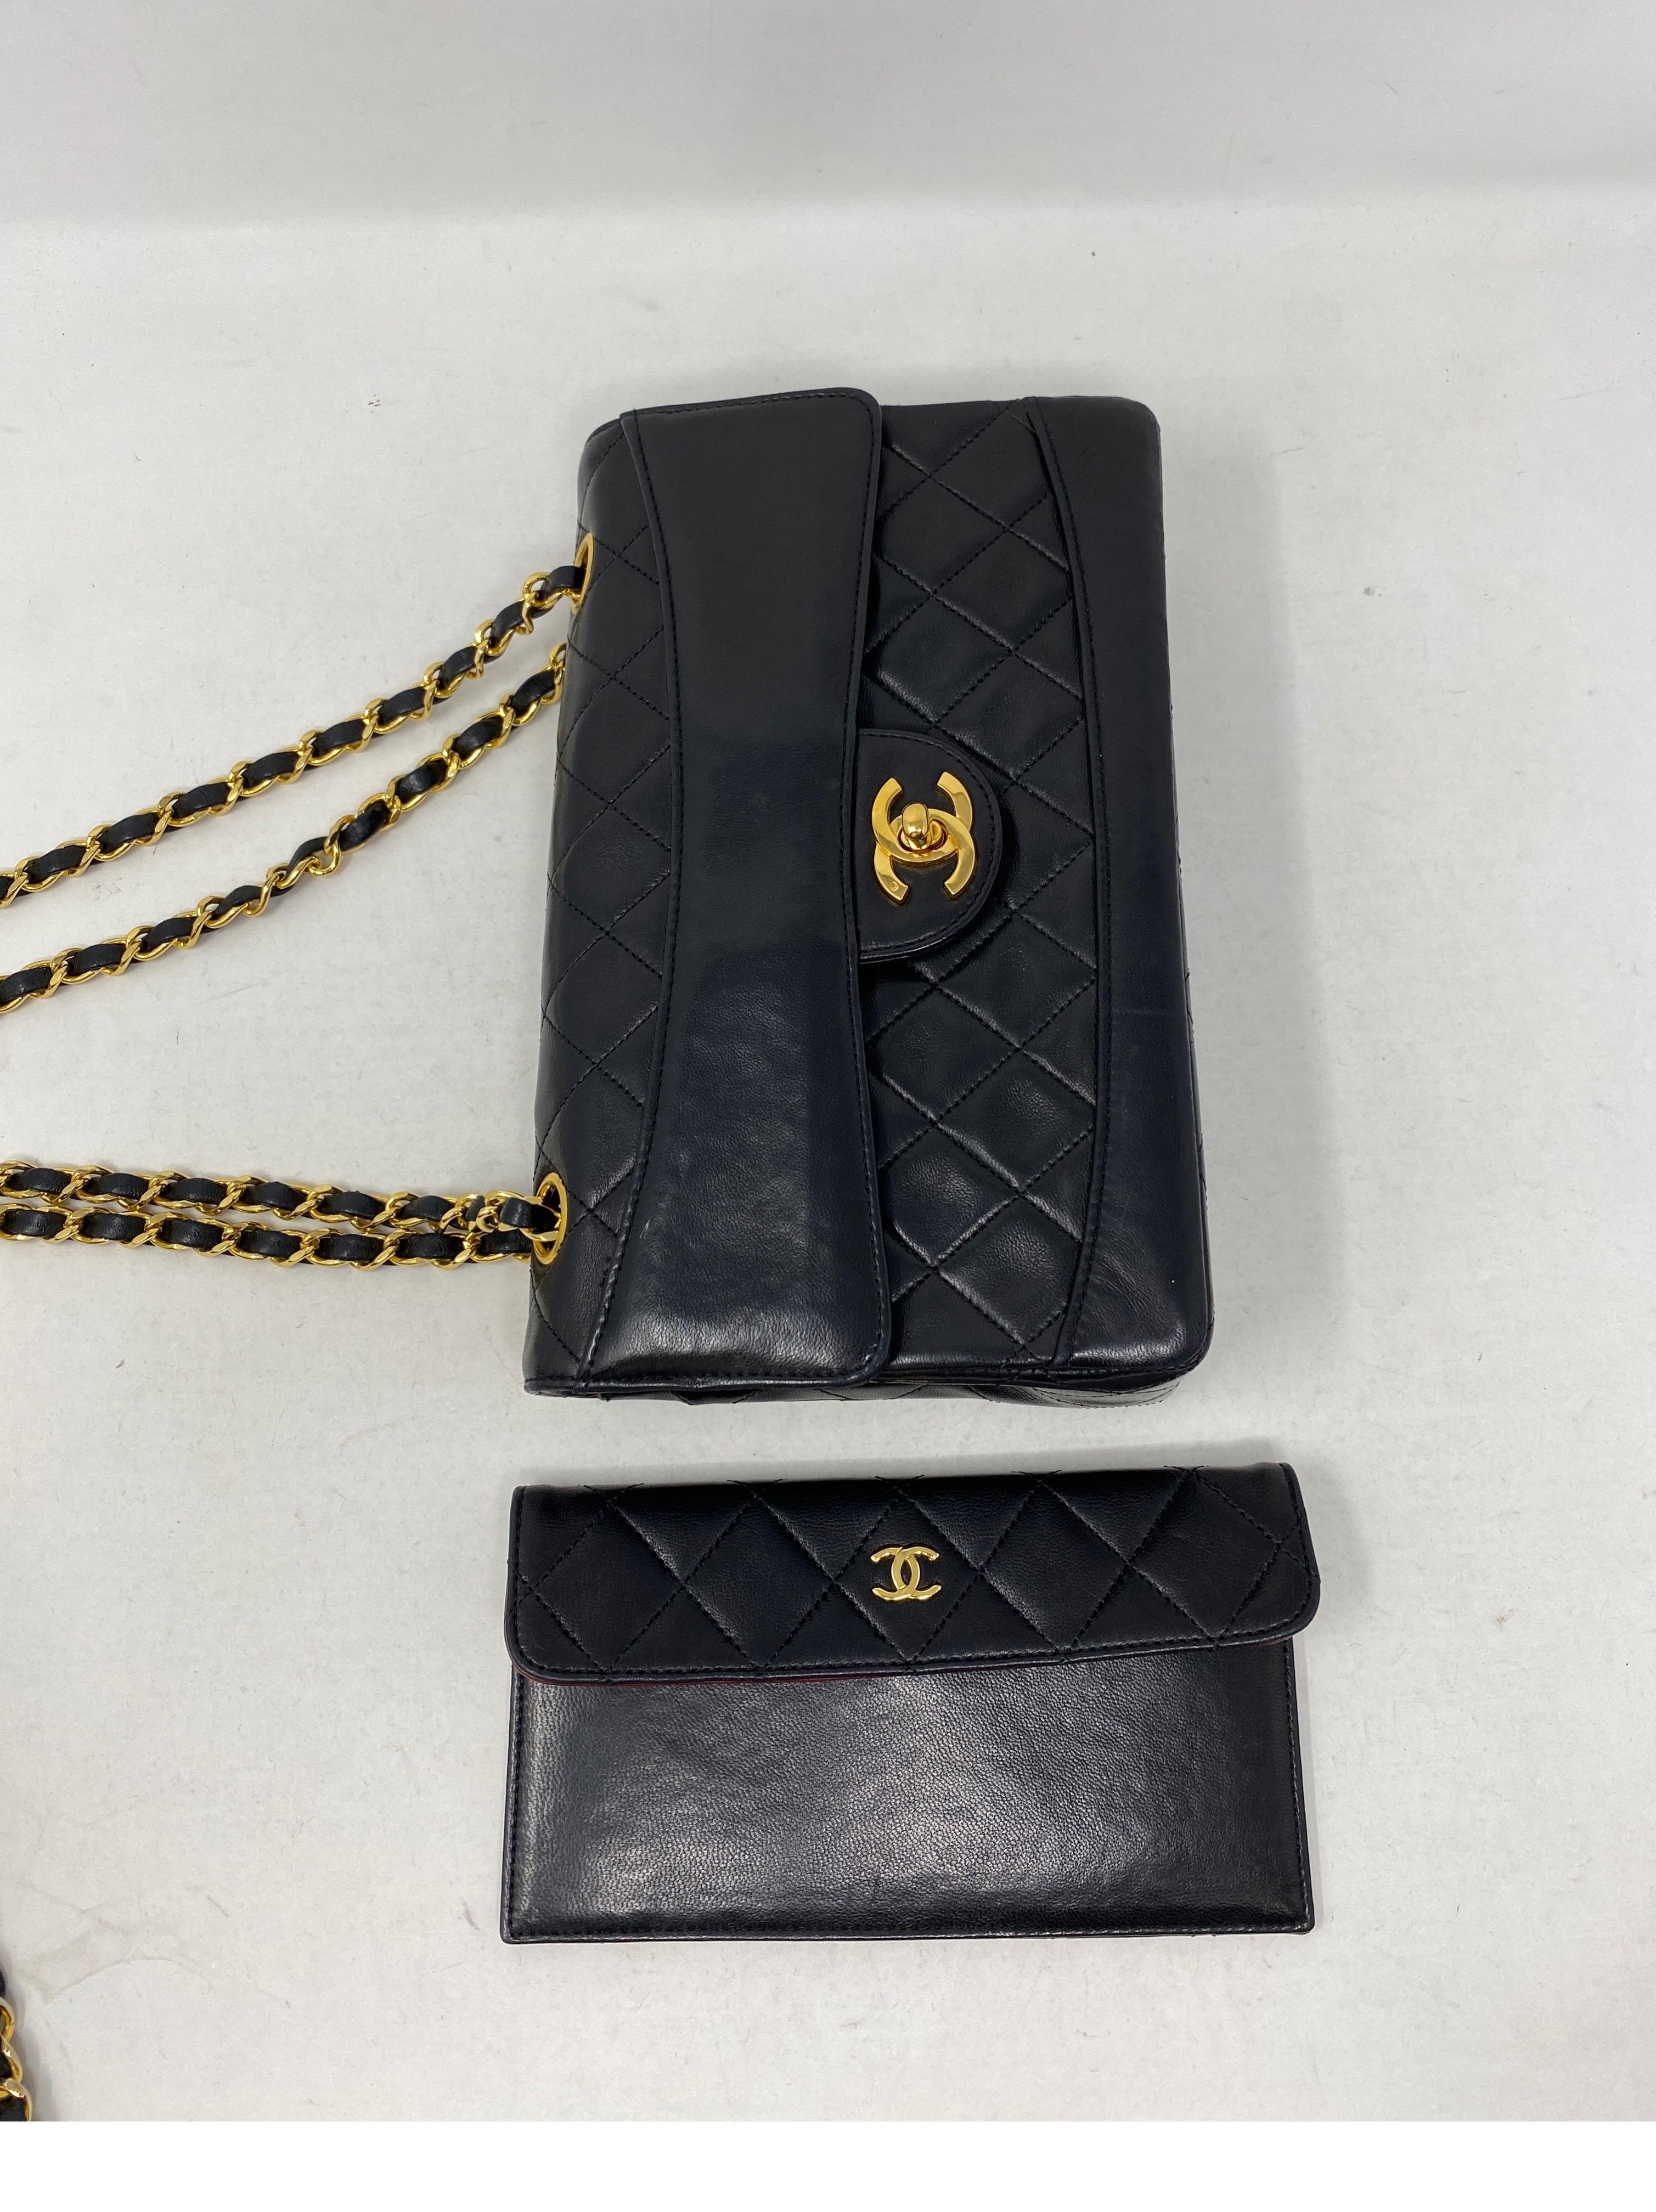 Chanel Black Flap Bag with Wallet. Black lambskin leather bag with wallet that can be attached inside with a snap. Medium size bag. Vintage bag with 24 kt gold plating on hardware and chain. Collector's piece. Great condition. Has slight must odor